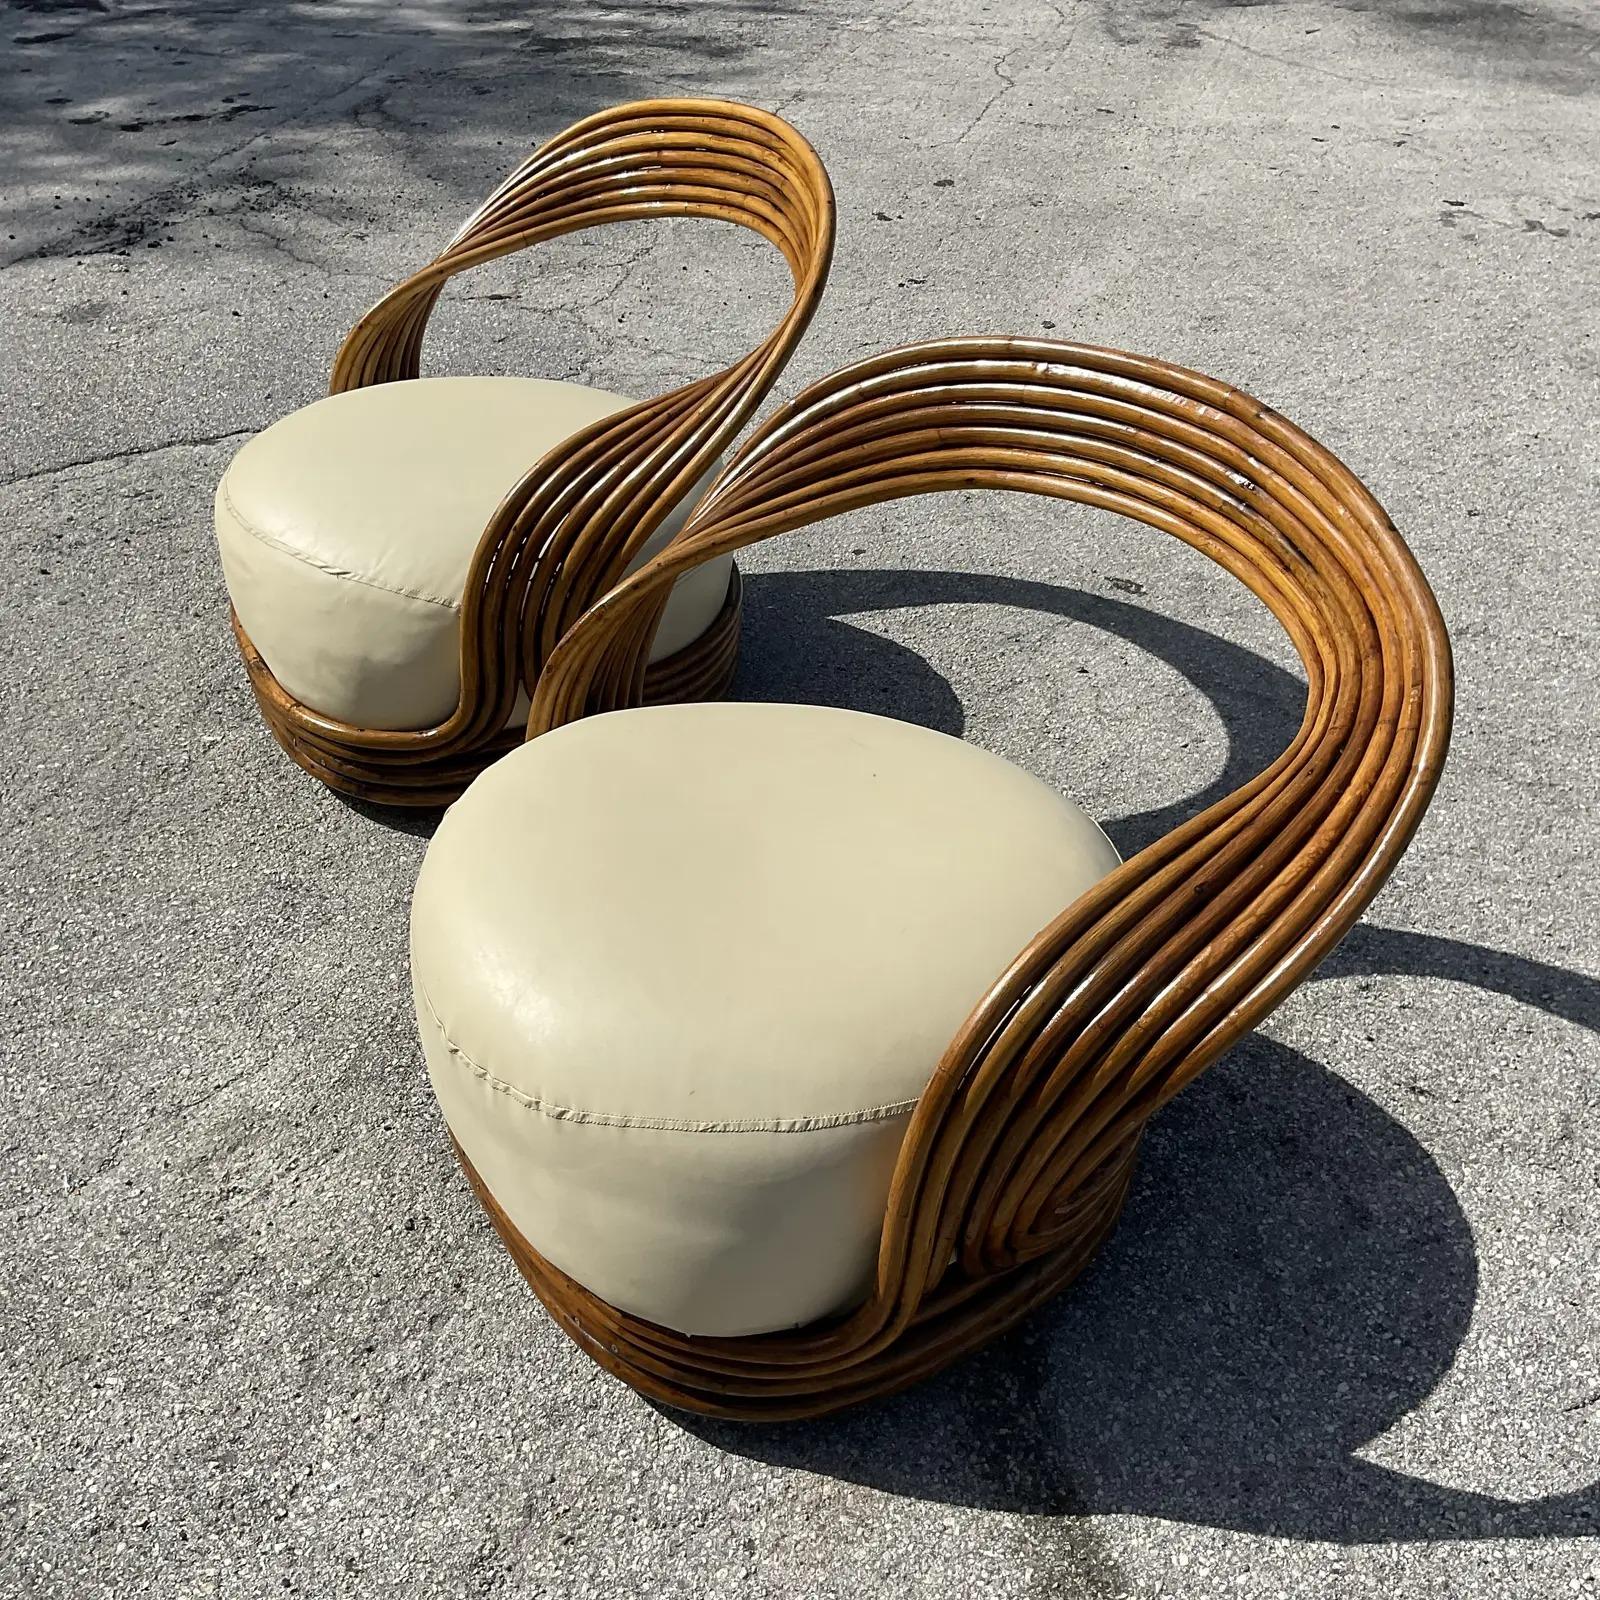 Incredible pair of vintage Coastal lounge chairs. The coveted “Eva” chair by Giovanni Travassa for Bonacina. Beautiful fluid organic lines. Acquired from a Palm Beach estate.